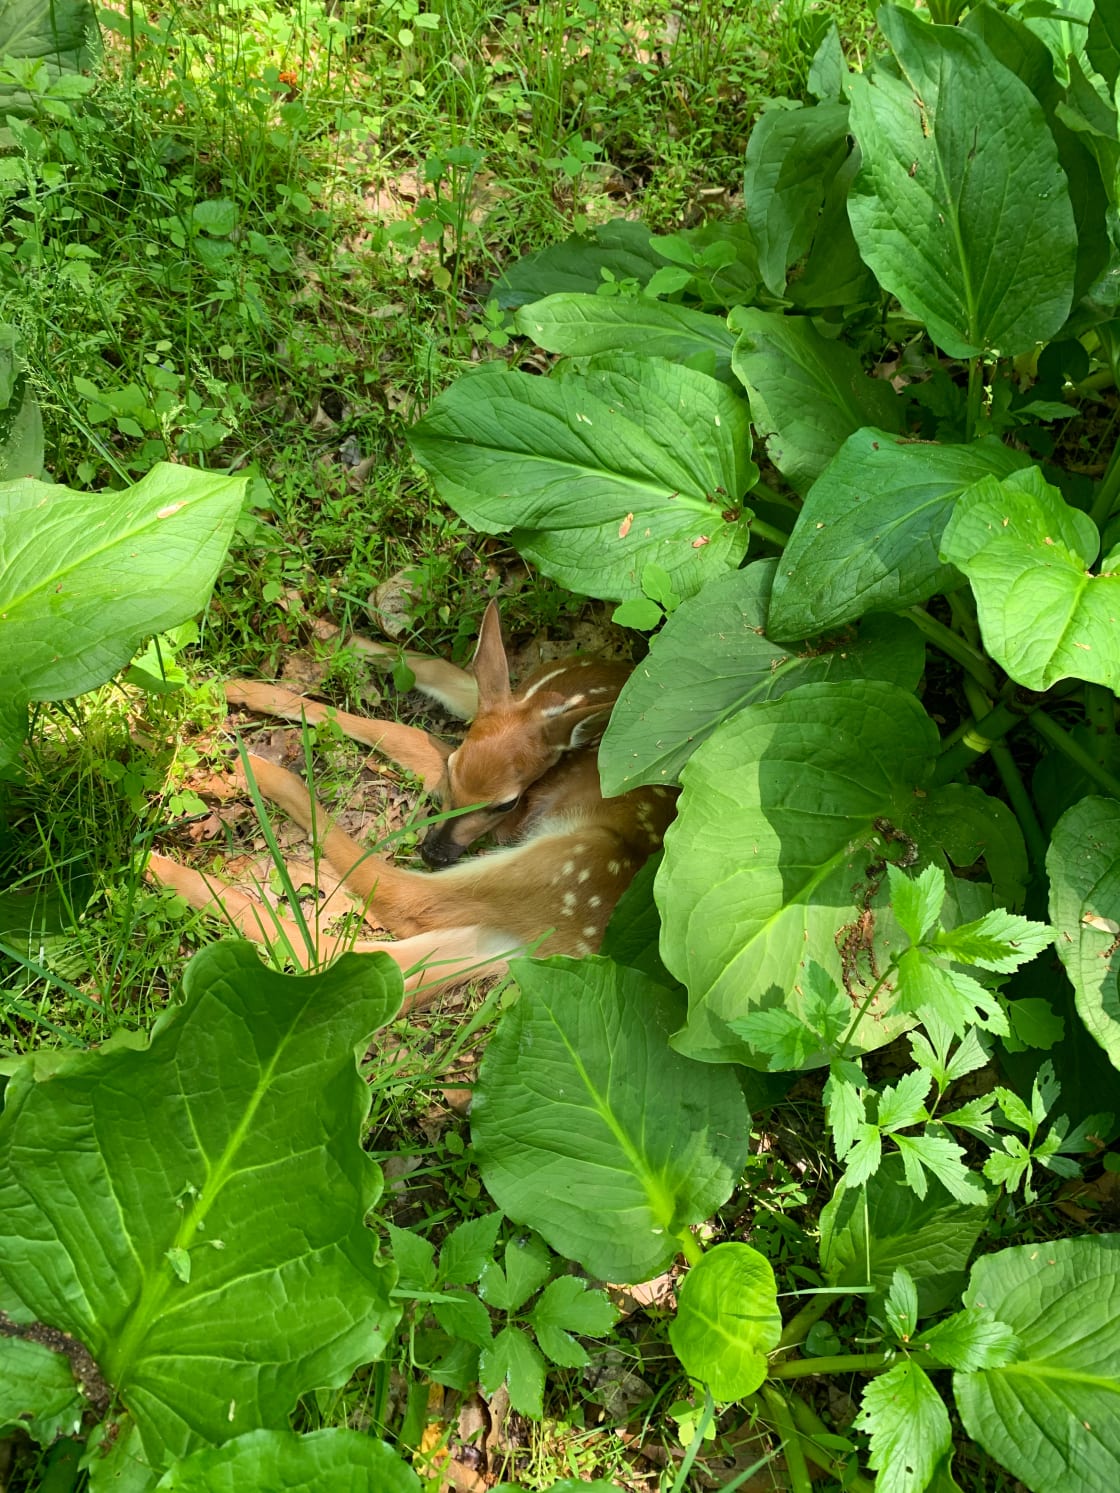 You might even get the chance to spot some of the resident wildlife during your stay! This fawn was bedded down right on the walking path!